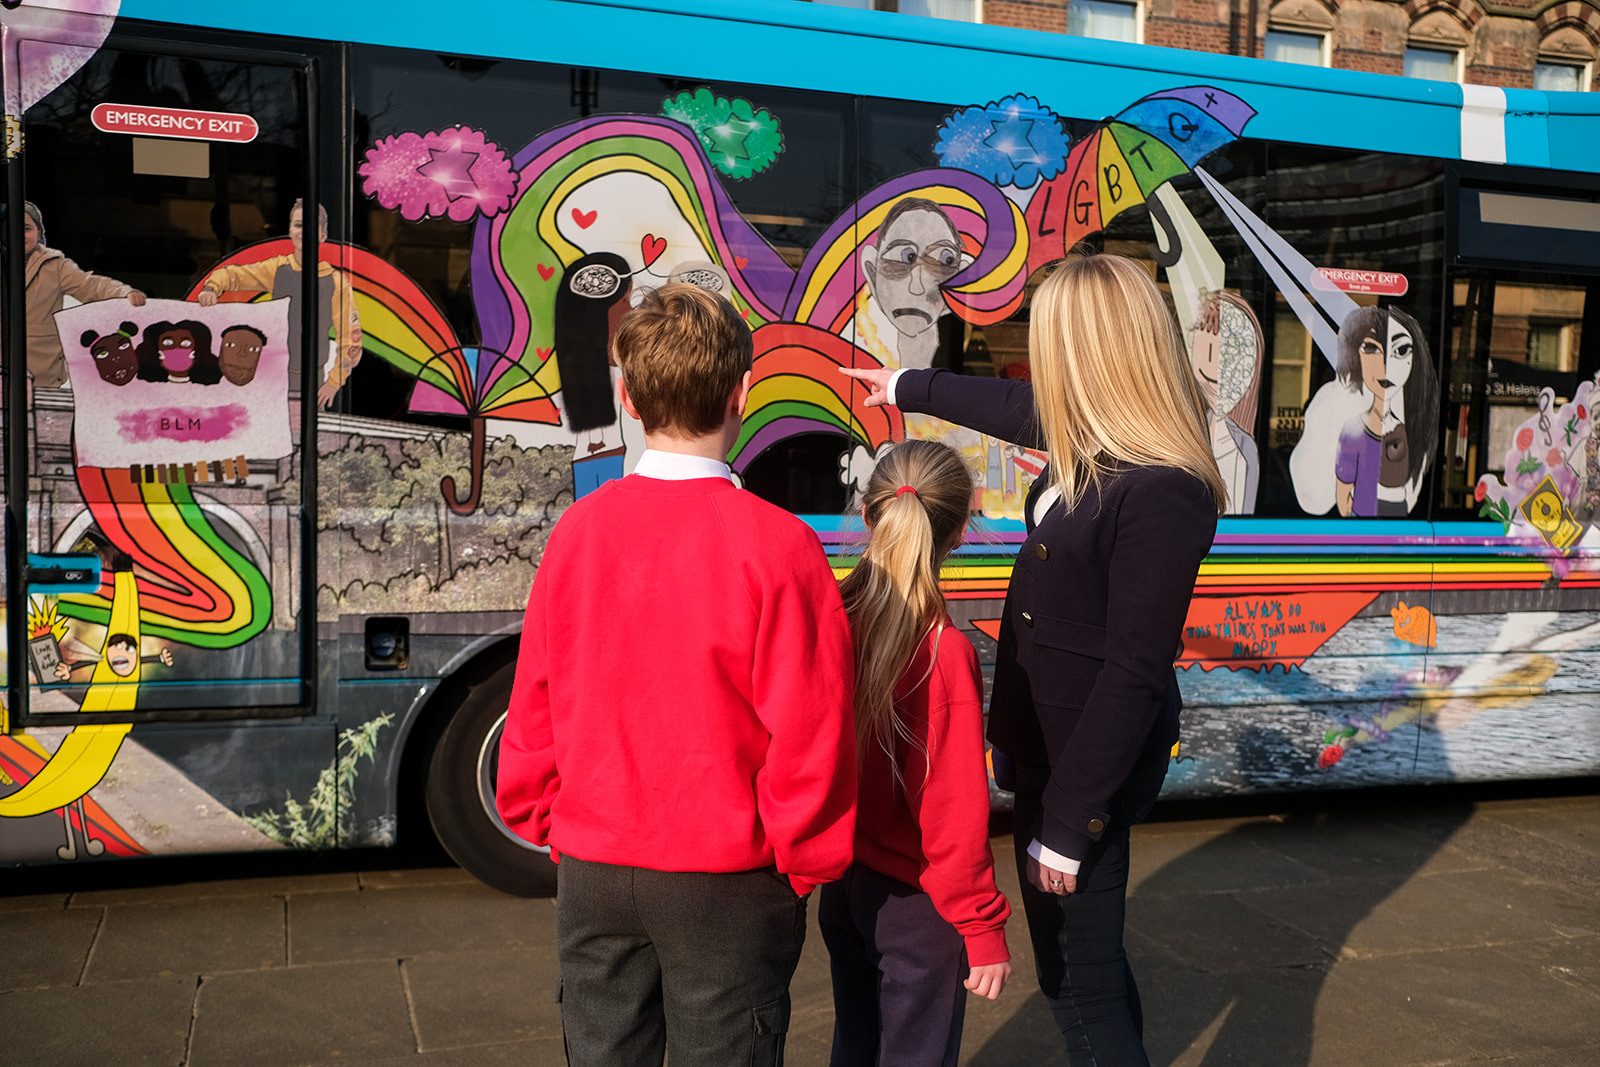 Three people, two children in school uniform and one adult, stand looking at the side of the decorated bus.